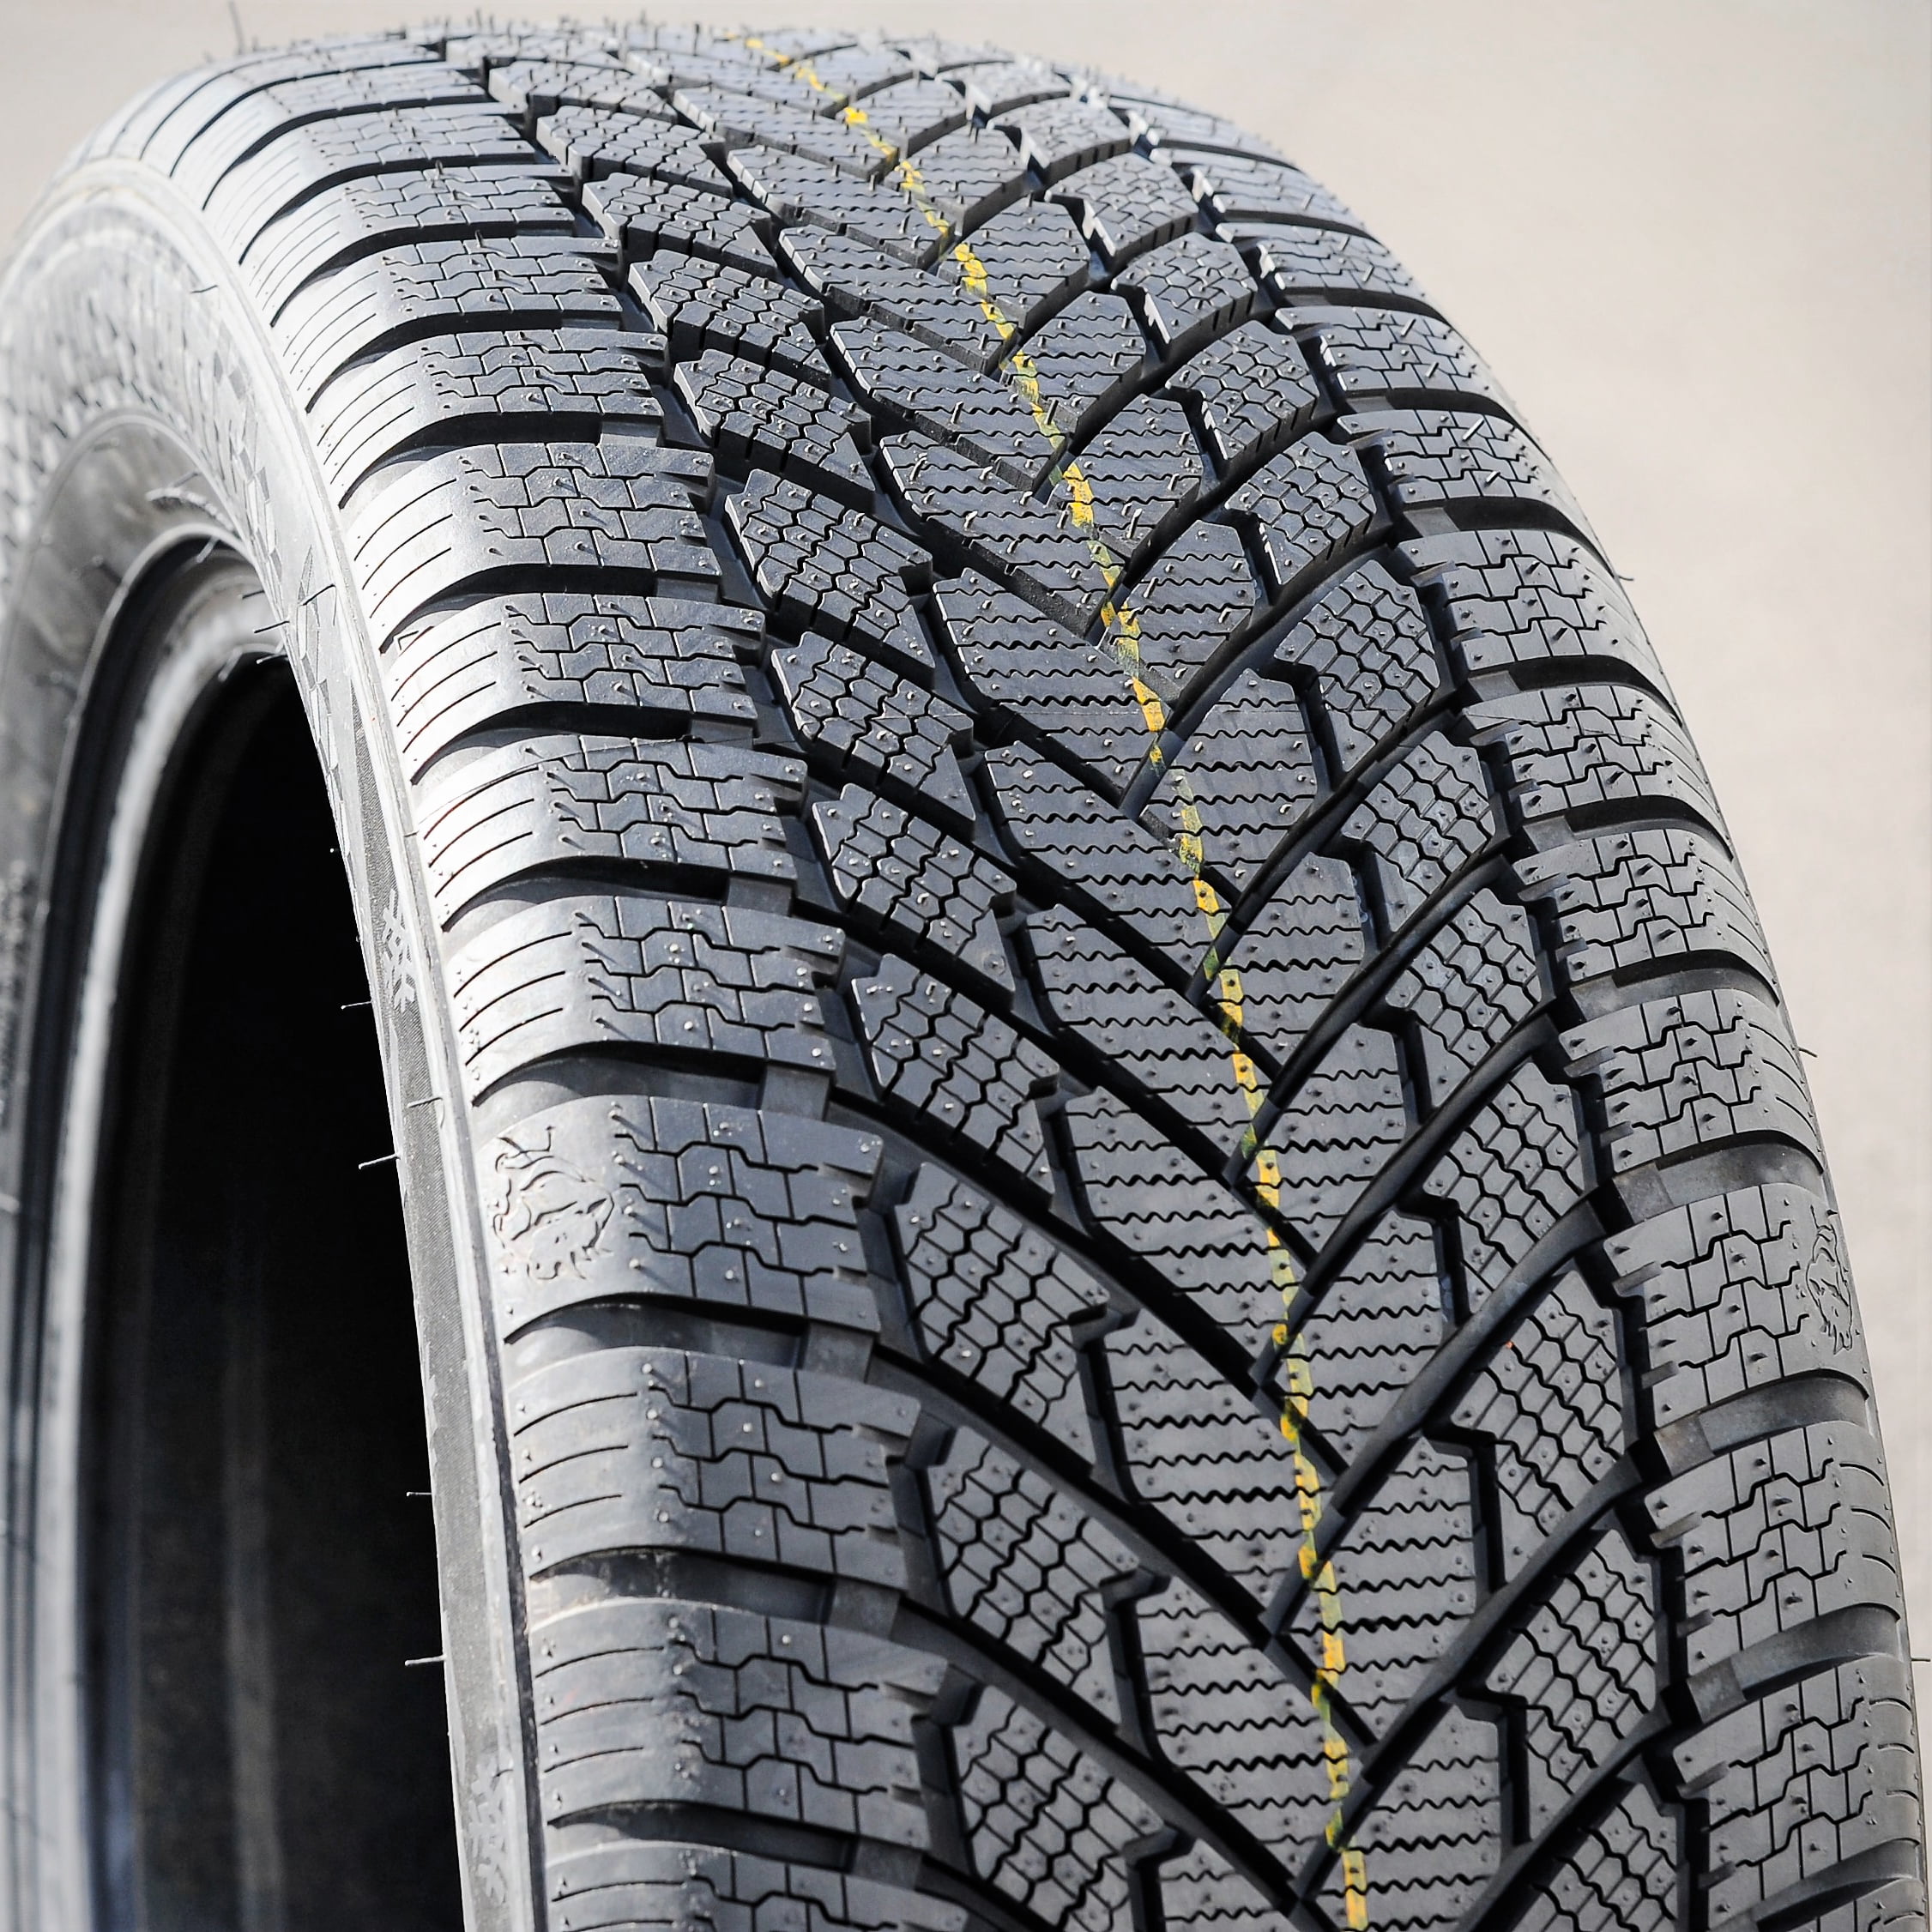 Continental ContiWinterContact TS810S 175/65R15 84T (Studless) Snow Tire